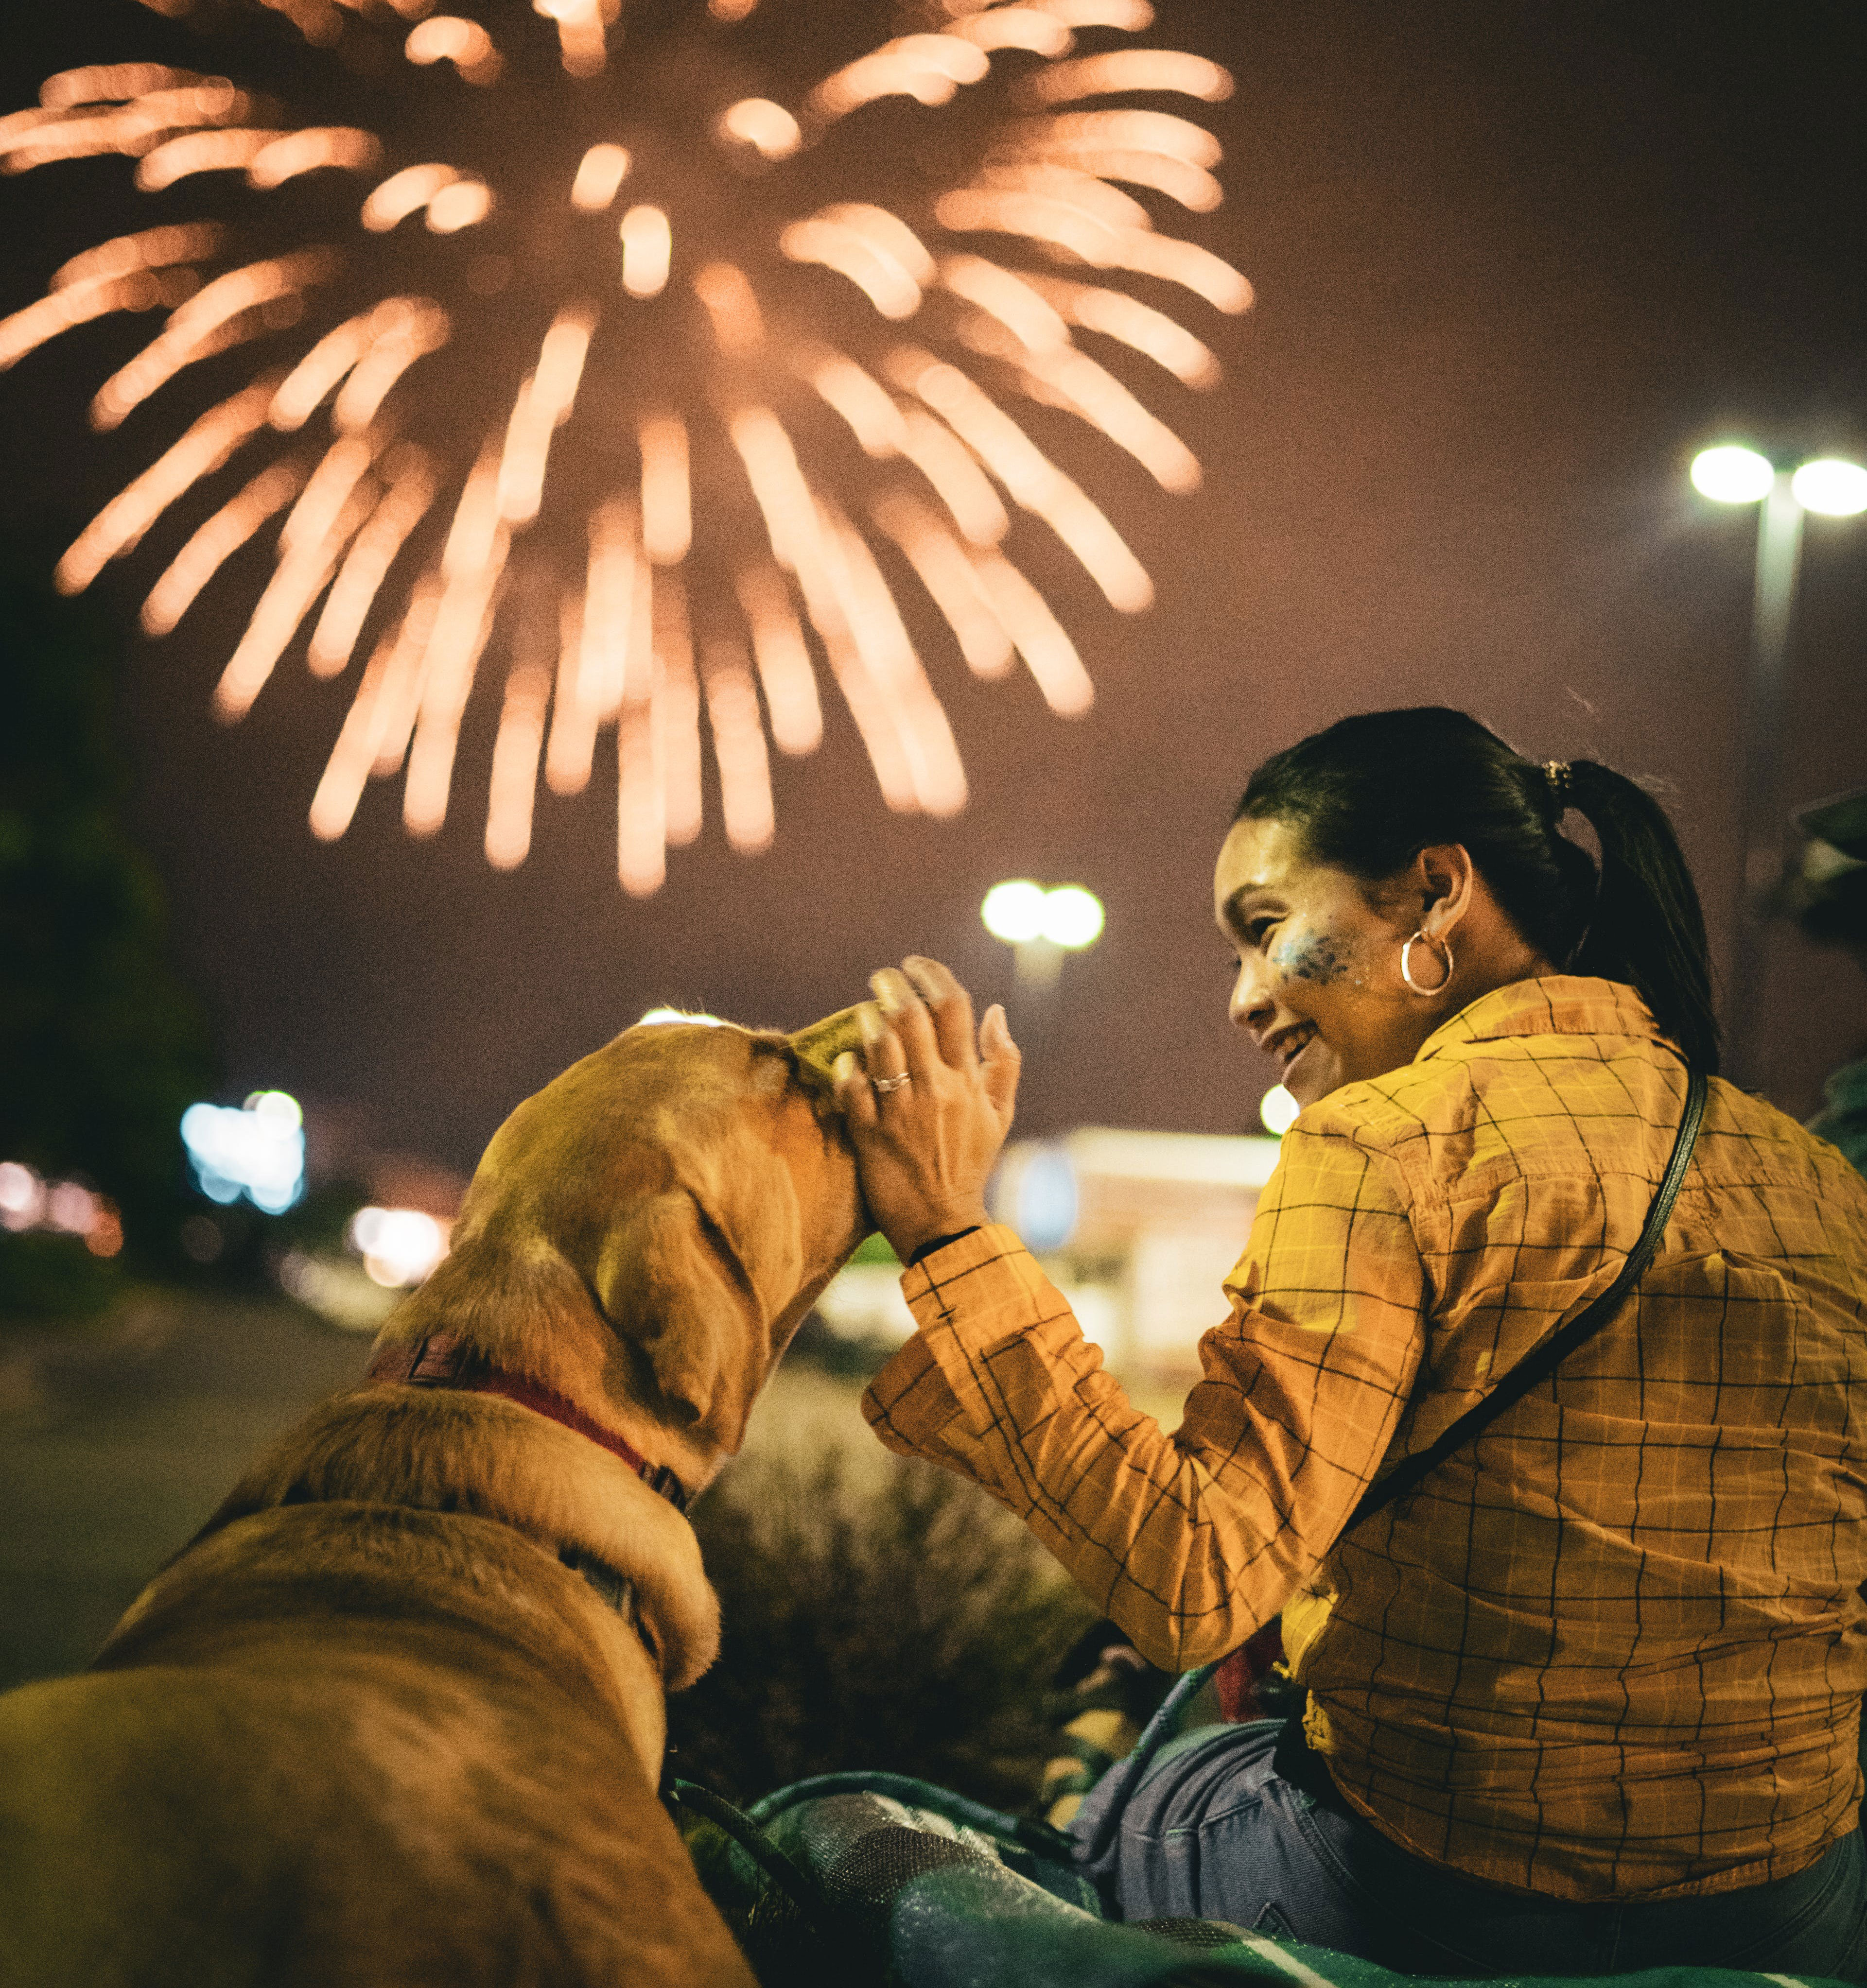 woman sitting and patting dog with fireworks behind